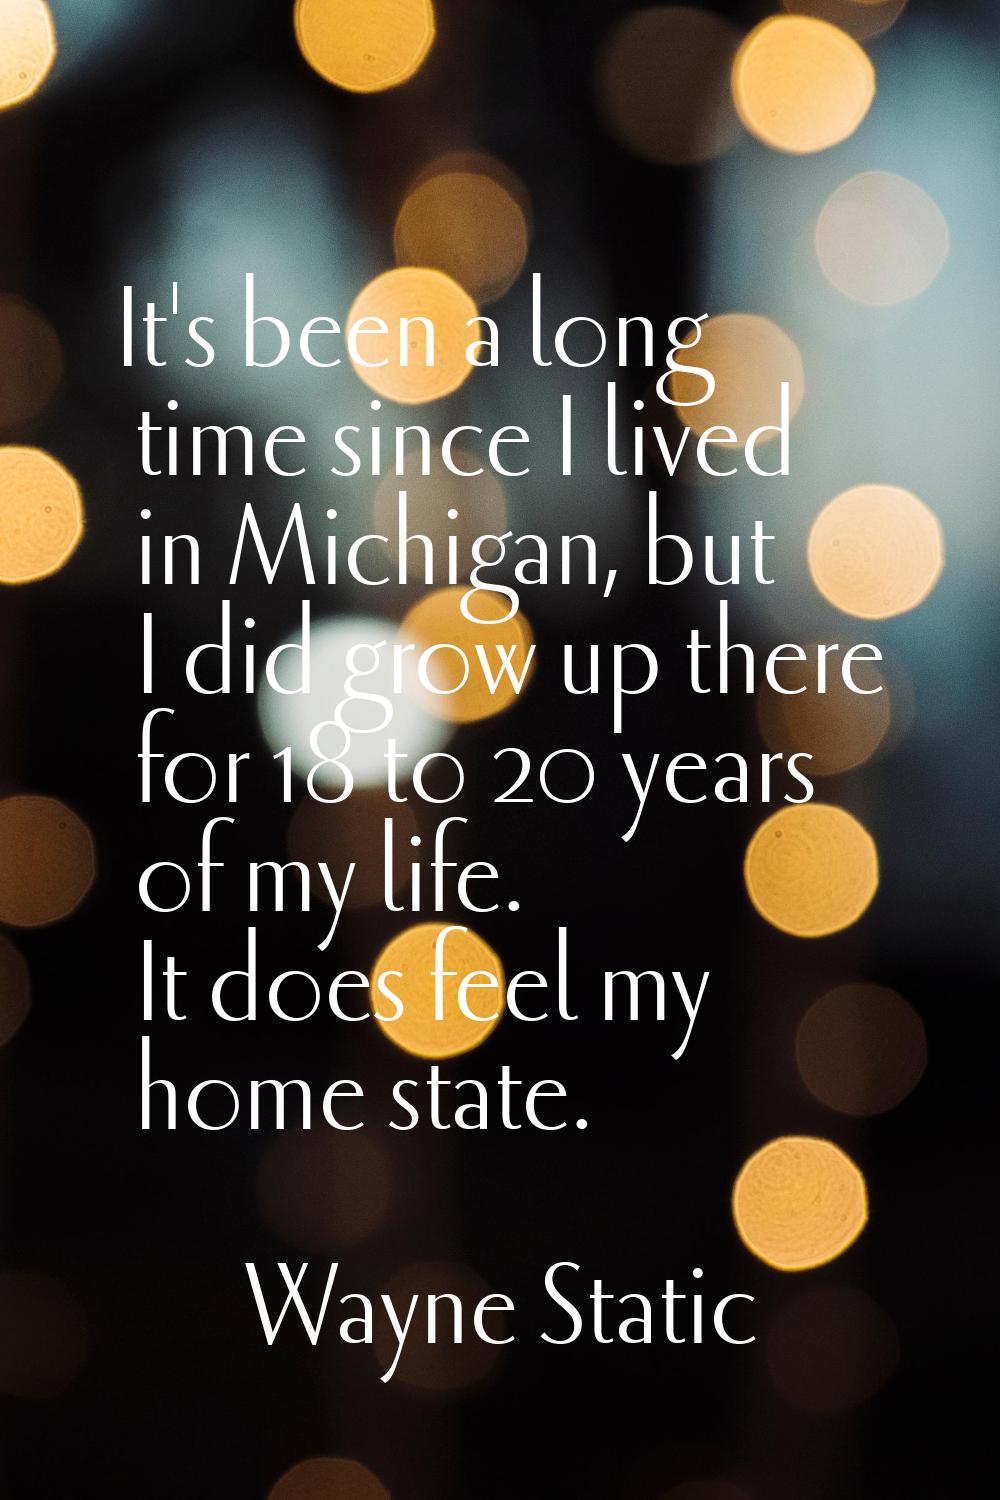 It's been a long time since I lived in Michigan, but I did grow up there for 18 to 20 years of my l